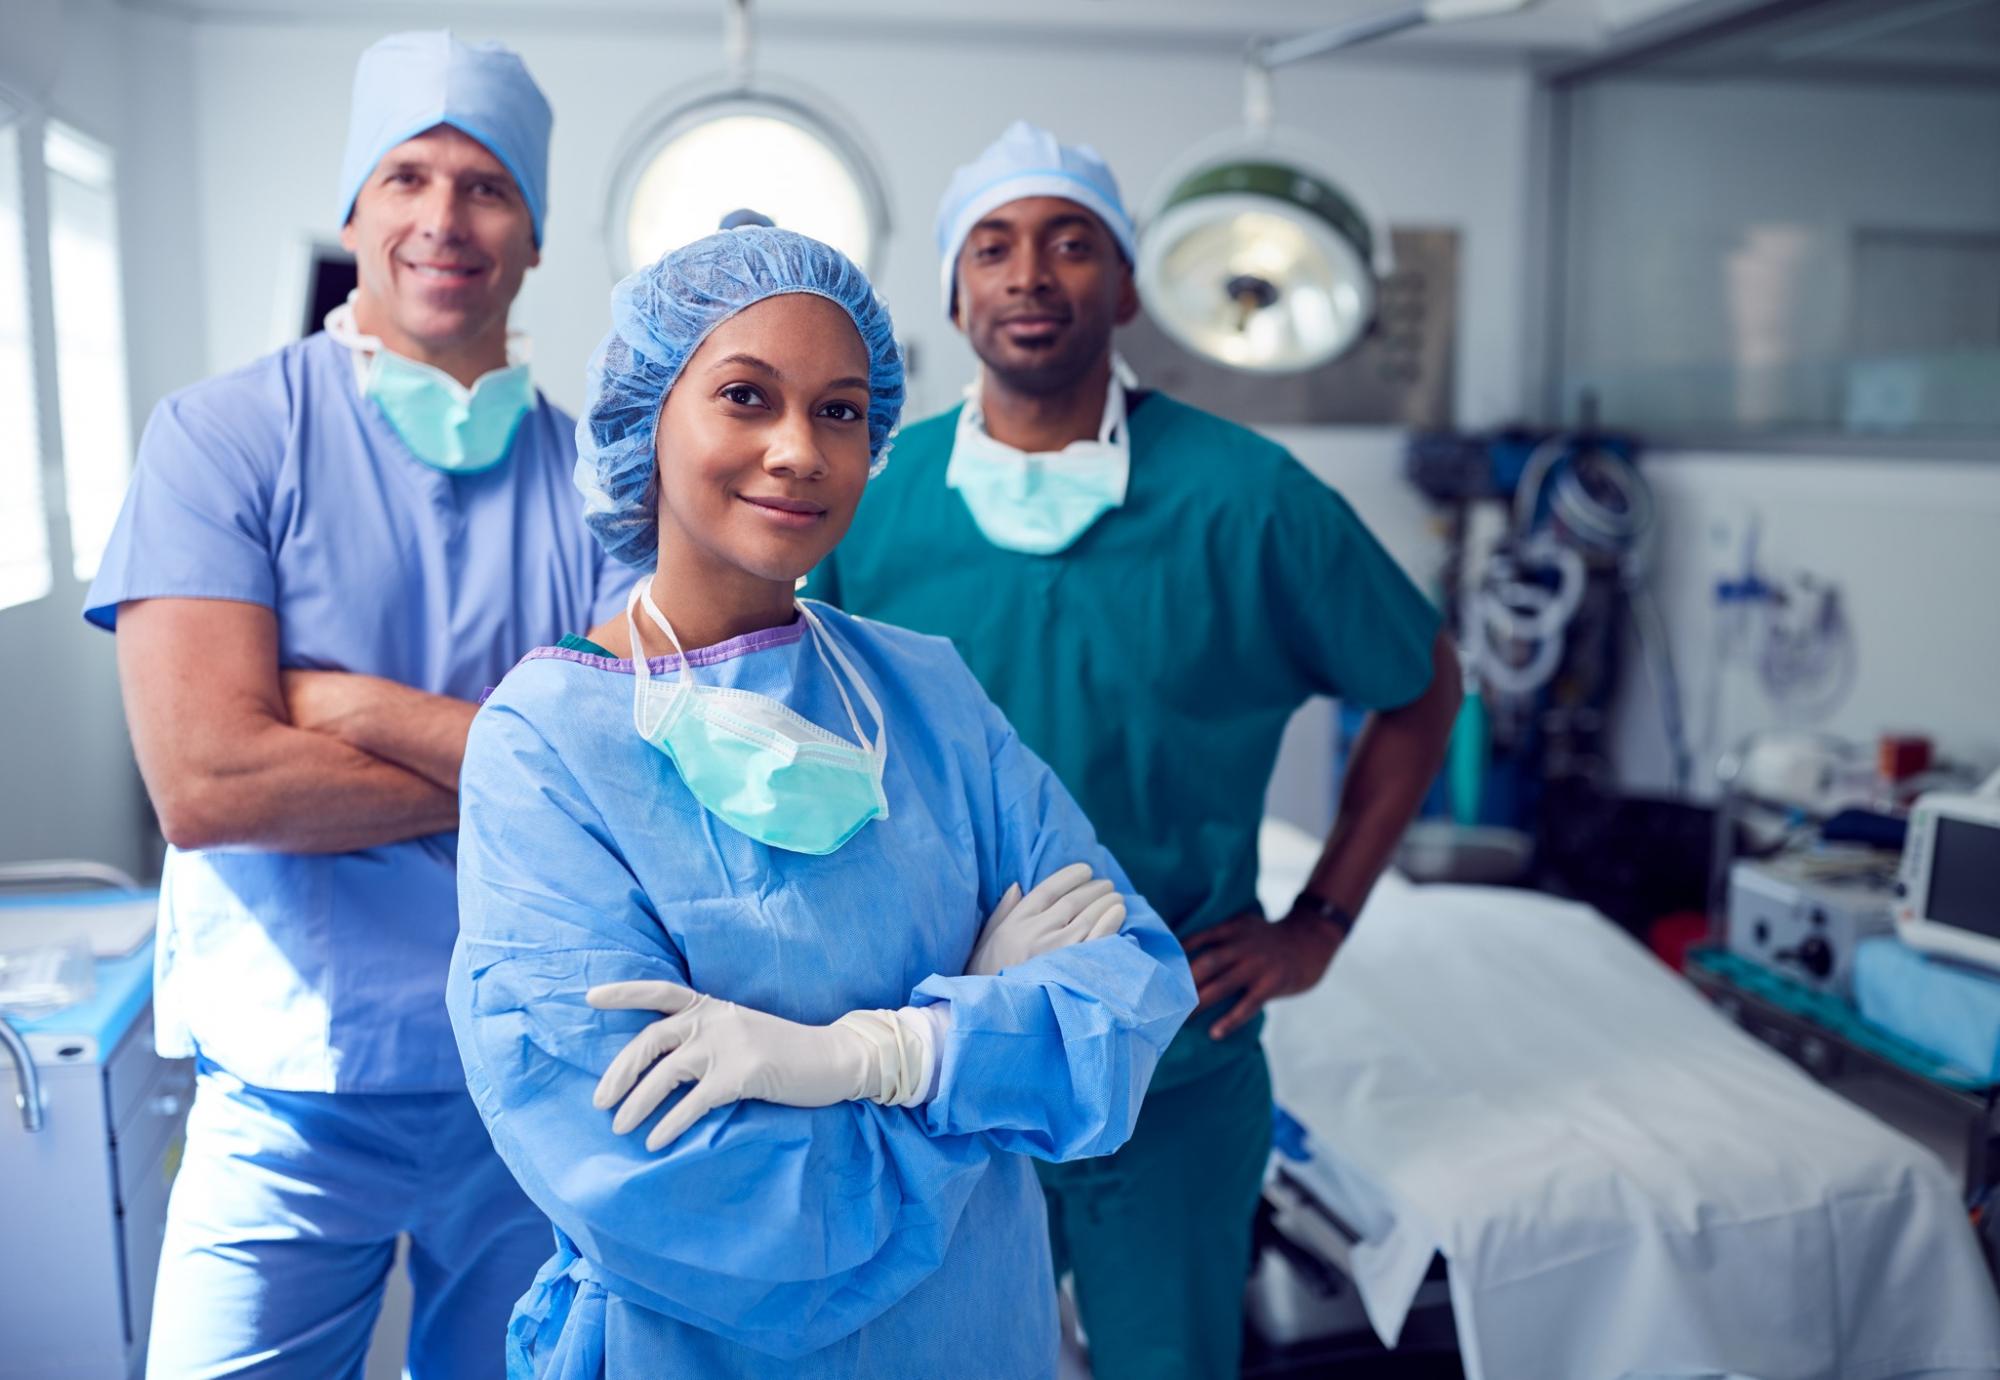 Group of medical colleagues in an operating theatre